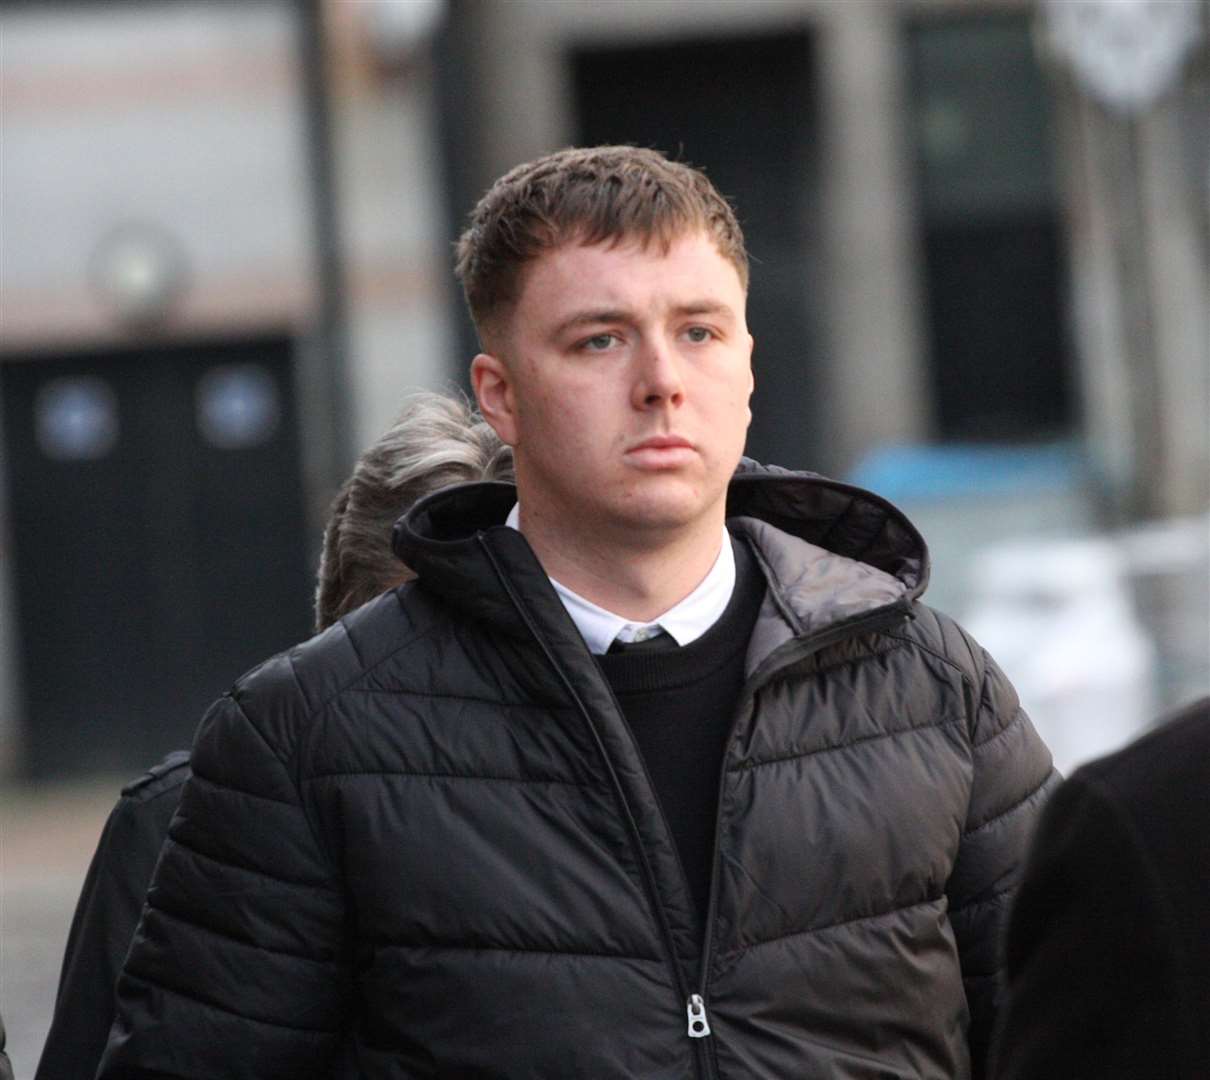 Mikey Durdle was jailed earlier this year. Picture: Central Scotland News Agency